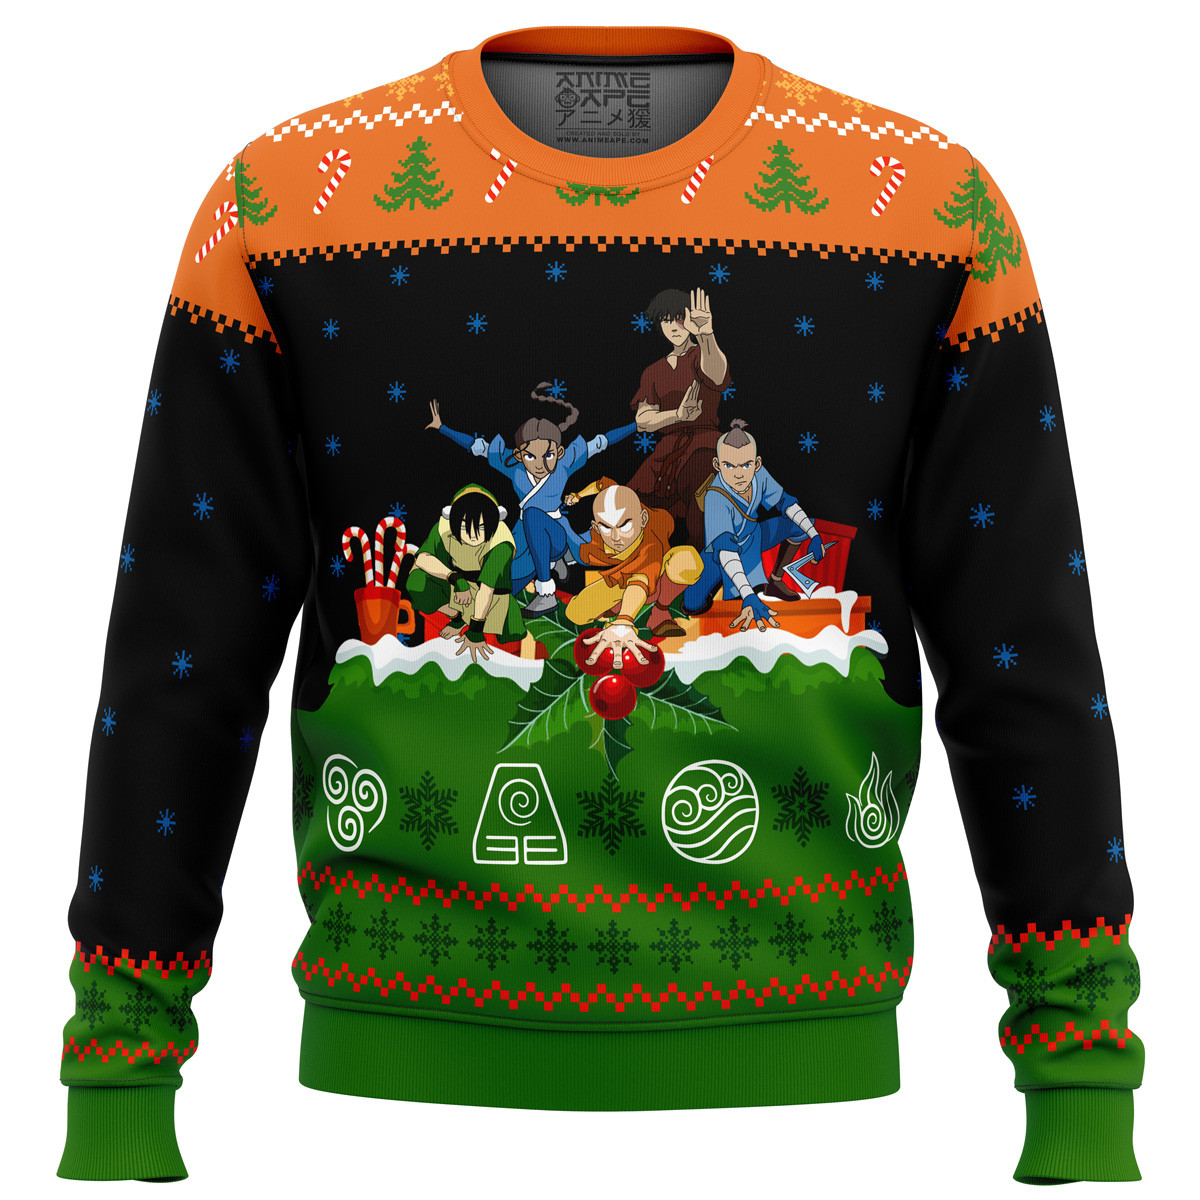 Avatar the Last Airbender On the Chimney Top Ugly Sweater